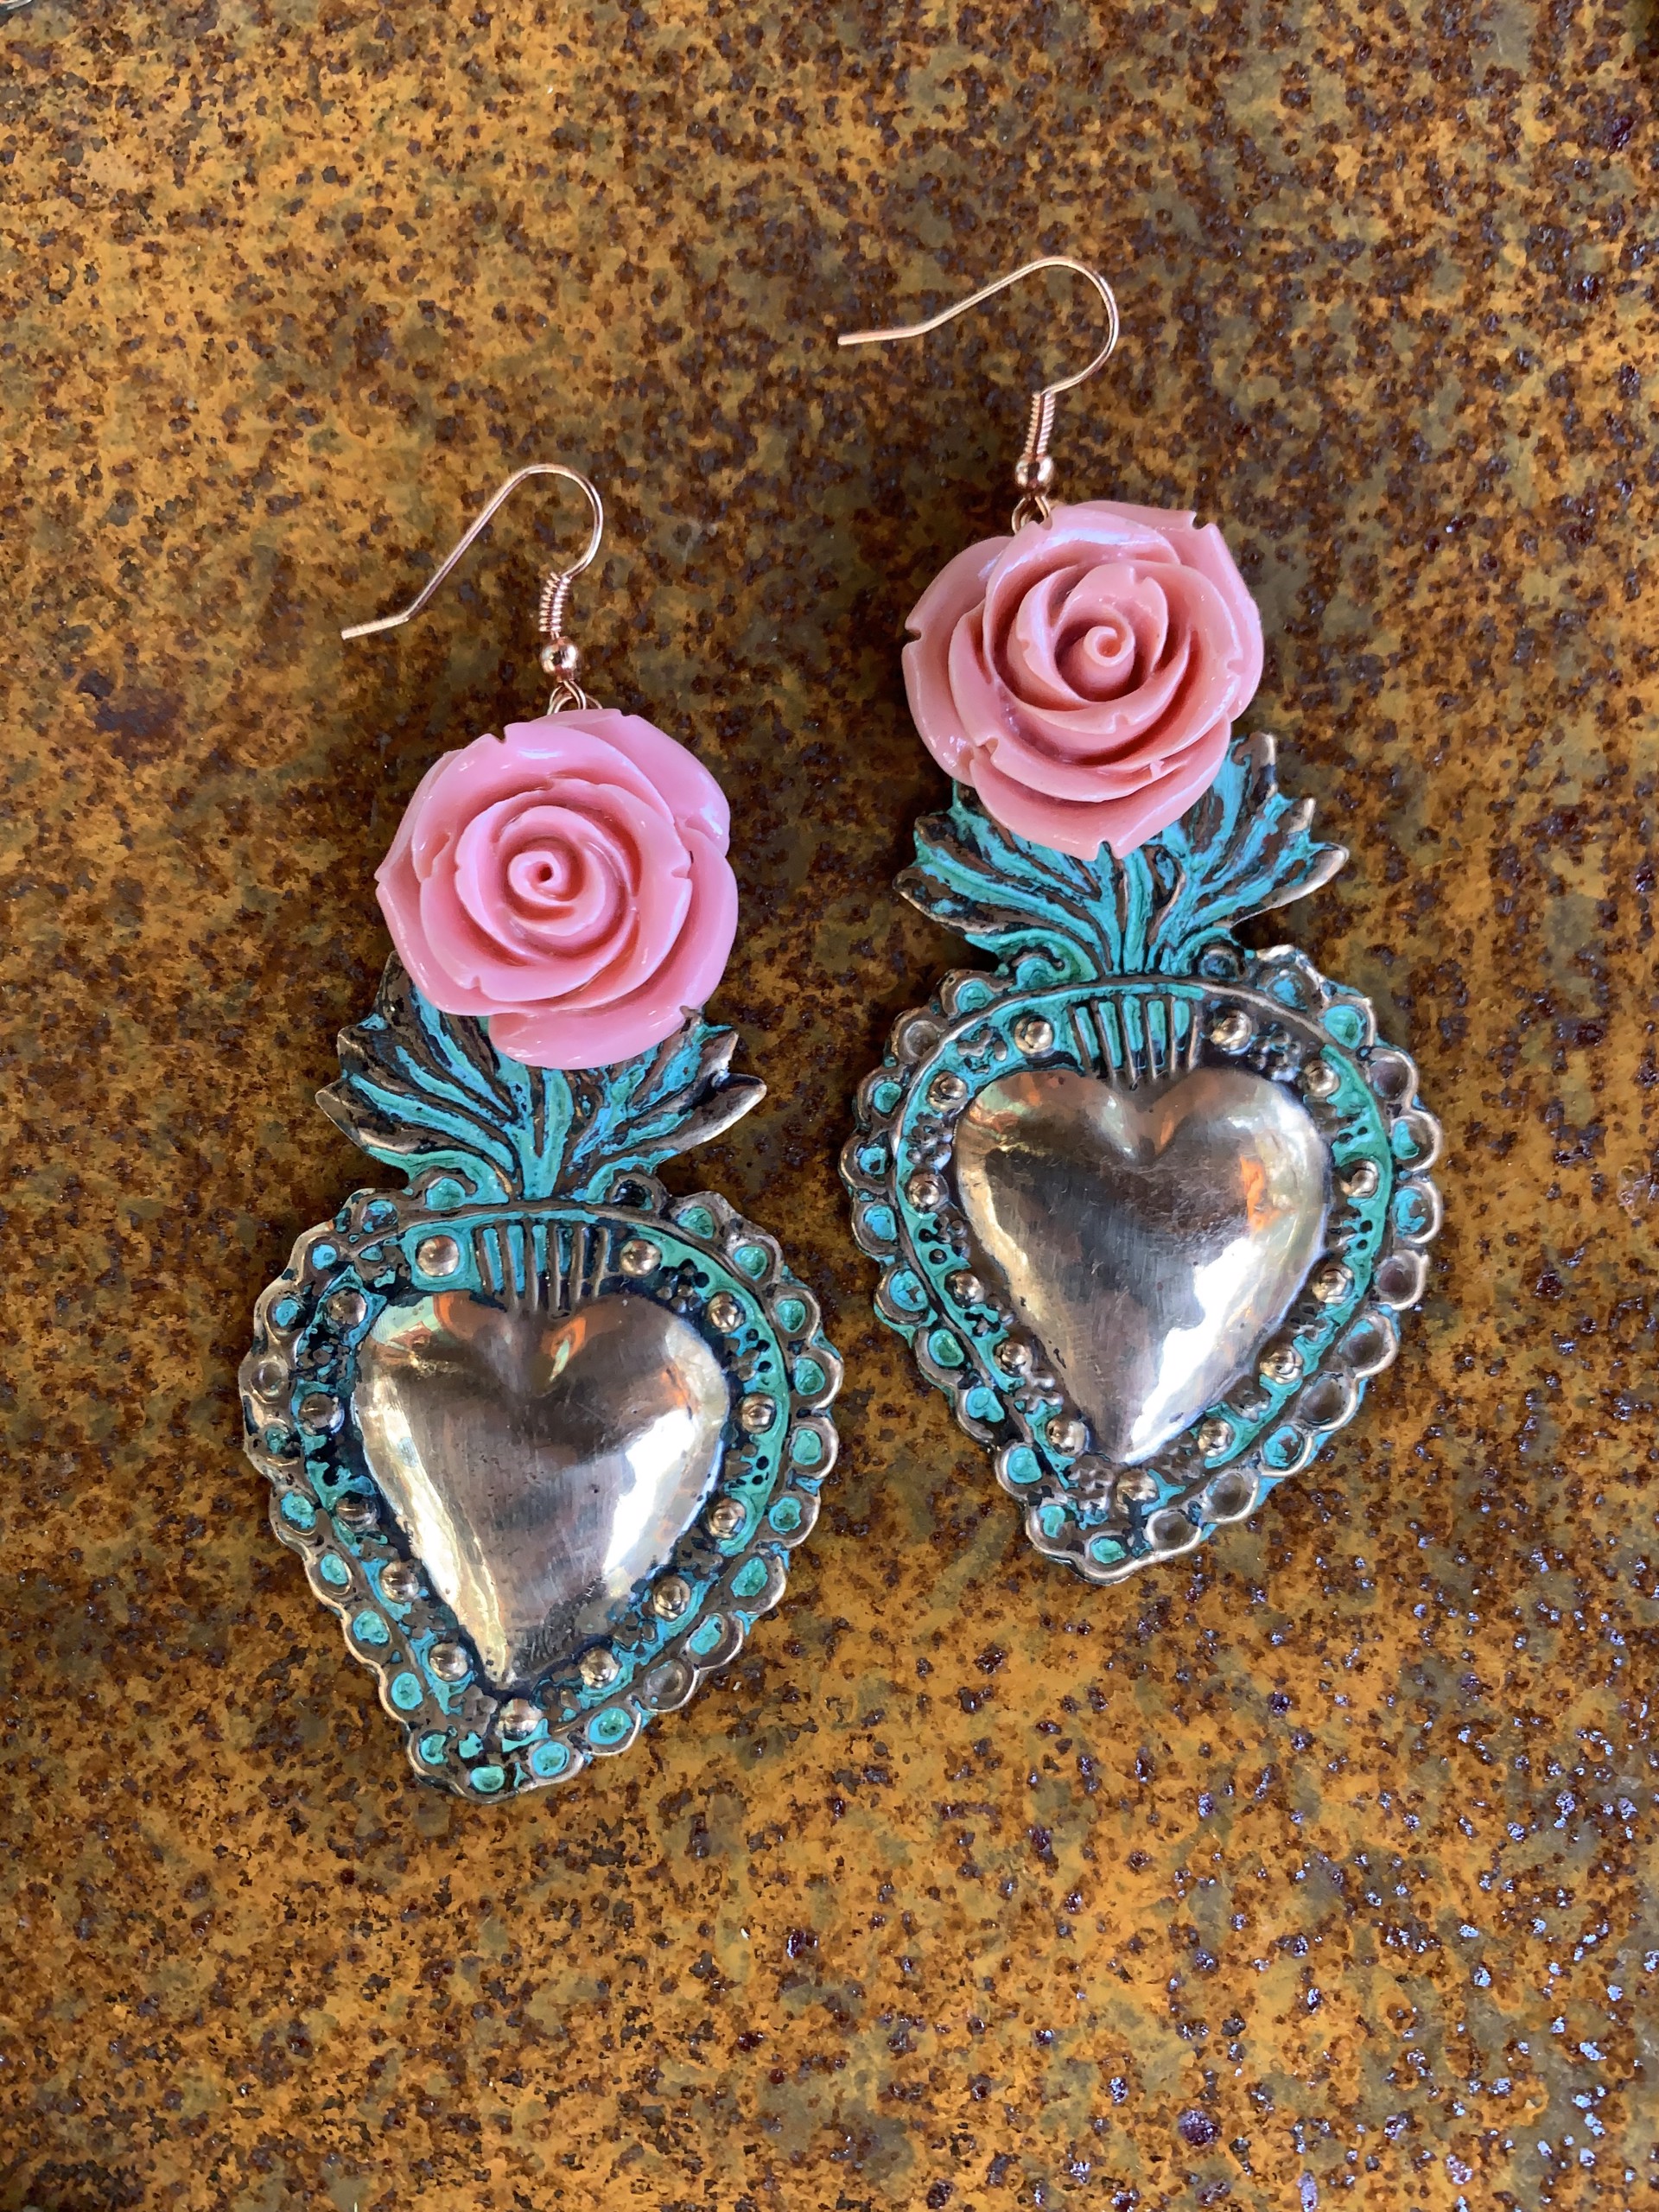 K472 Large Sacred Heart Earrings with Pink Roses by Kelly Ormsby